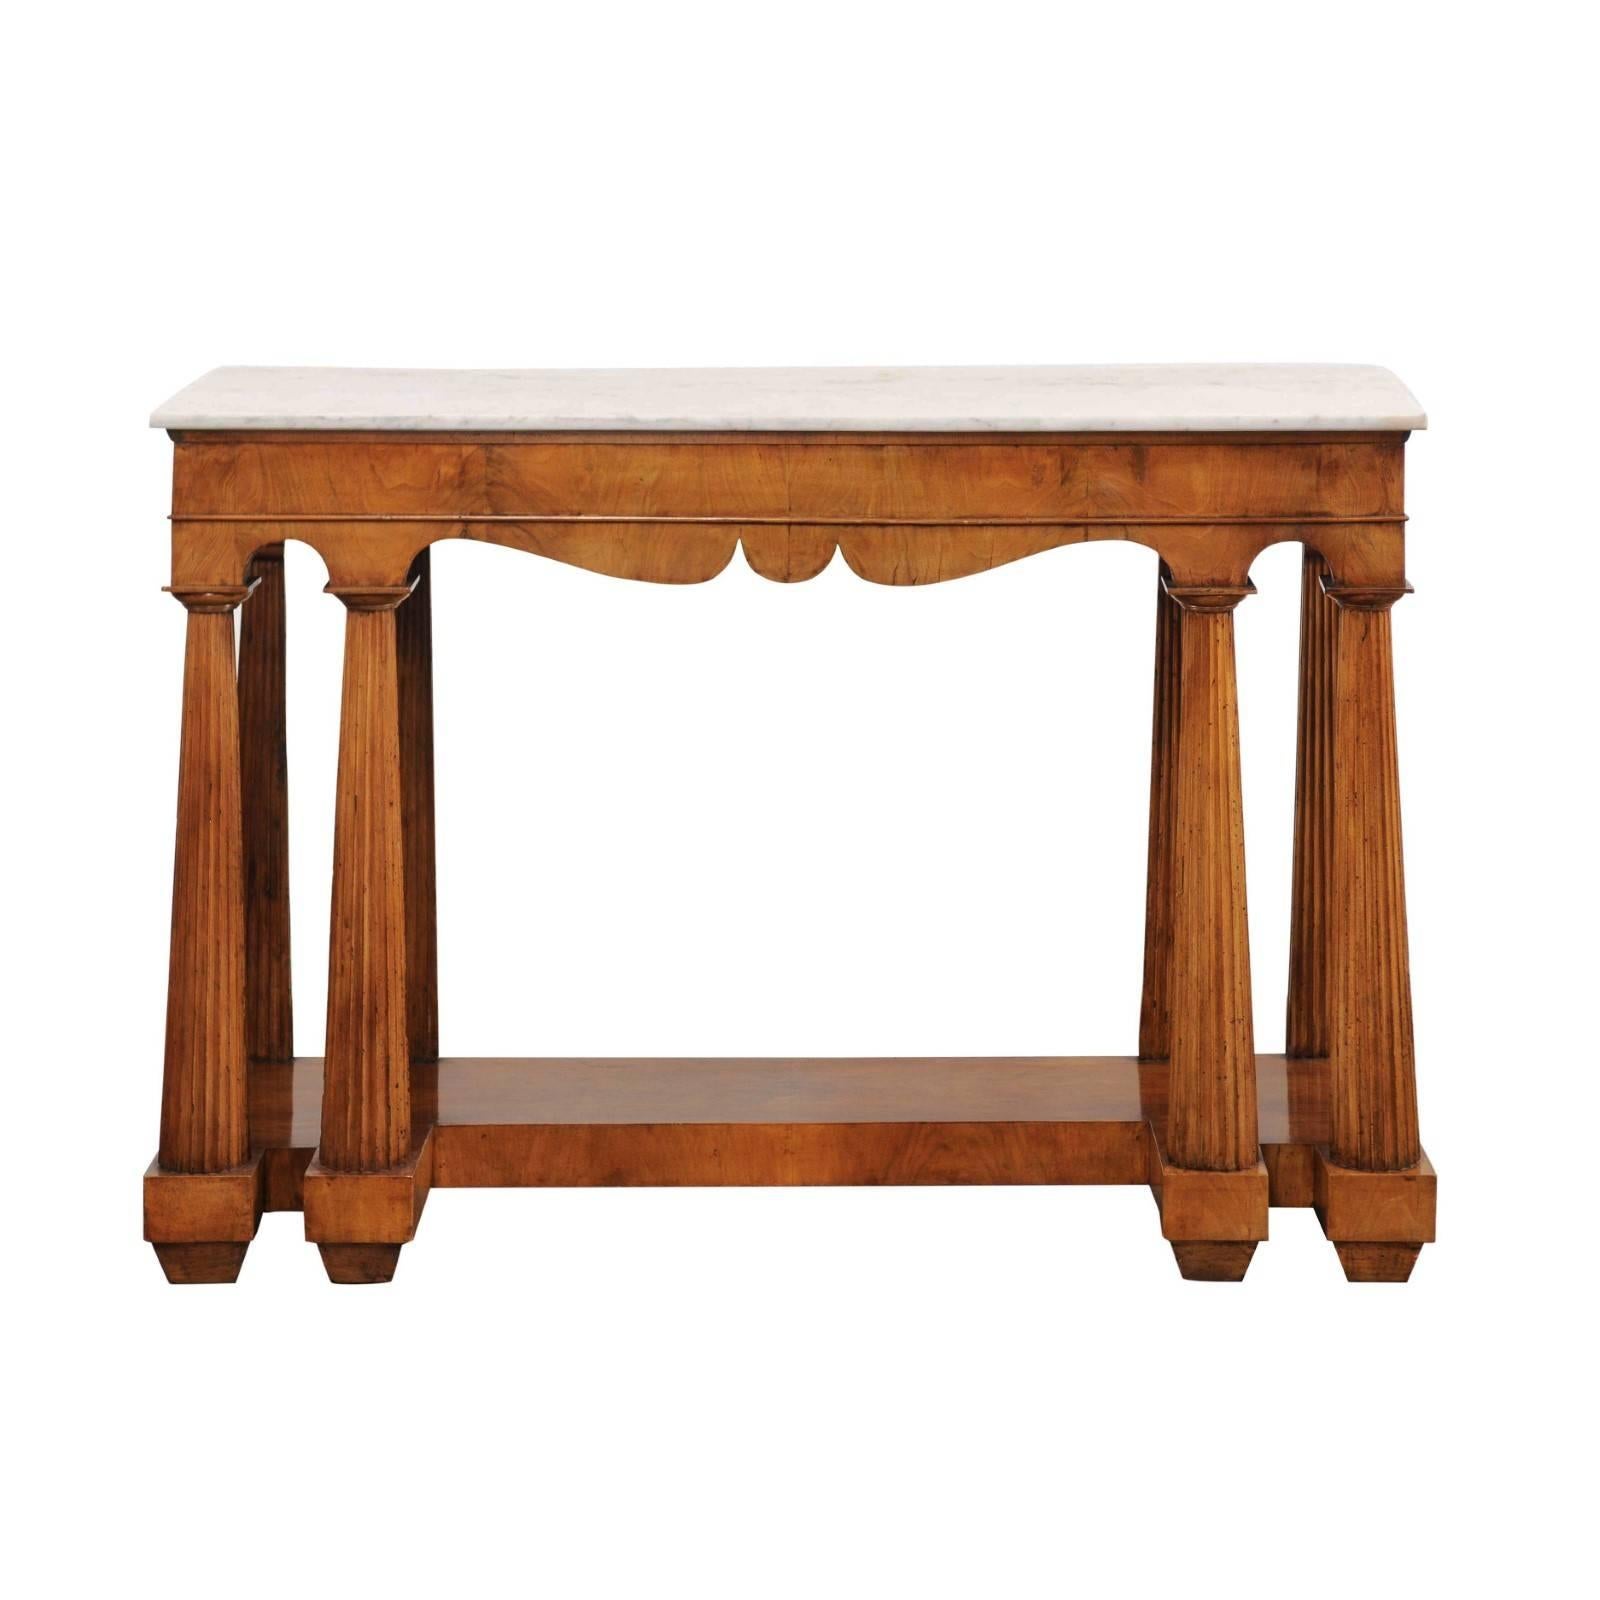 An Italian walnut veneered console table with white marble top, scalloped apron and fluted legs from the mid-19th century. This Italian console table features a rectangular white marble top, surmounting an exquisite bookmark-veneered apron with